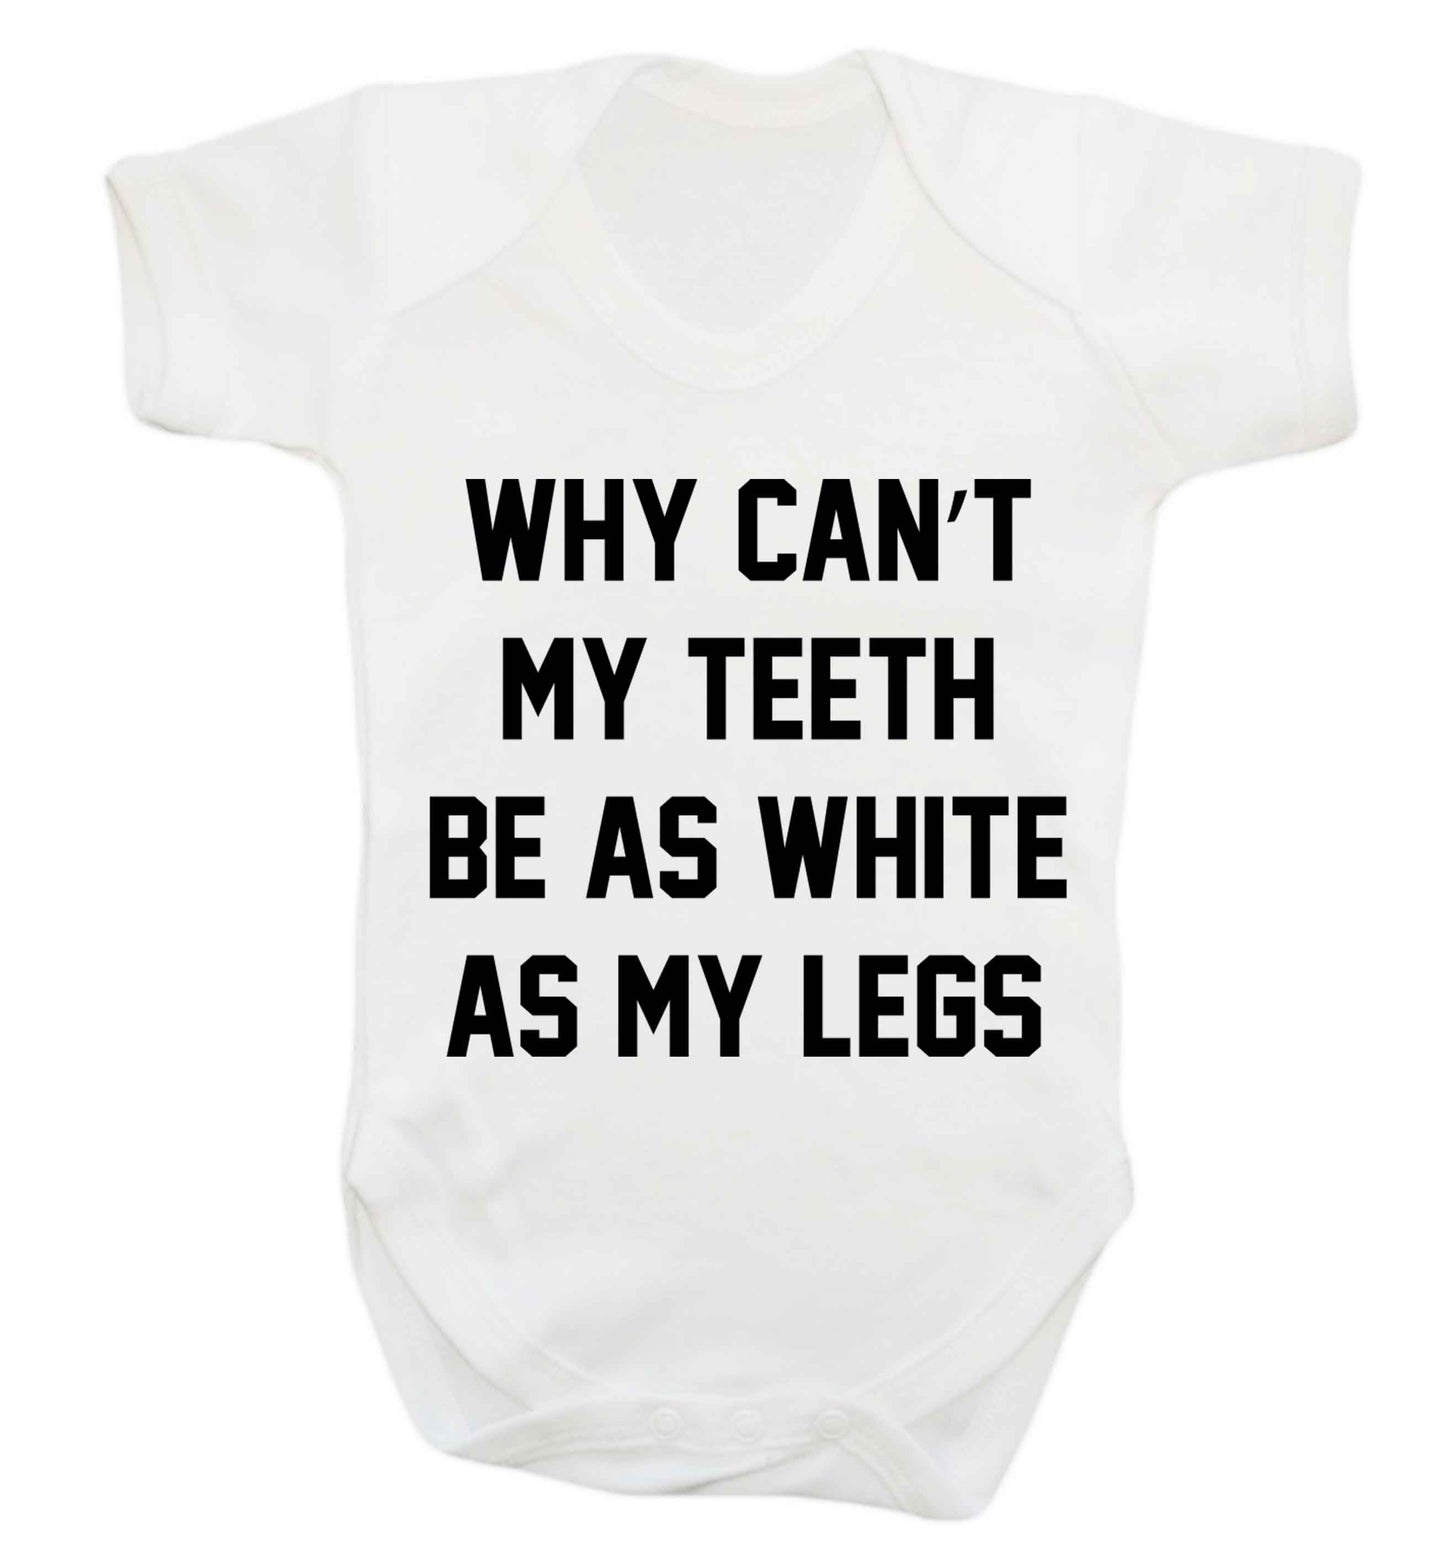 Why can't my teeth be as white as my legs Baby Vest white 18-24 months